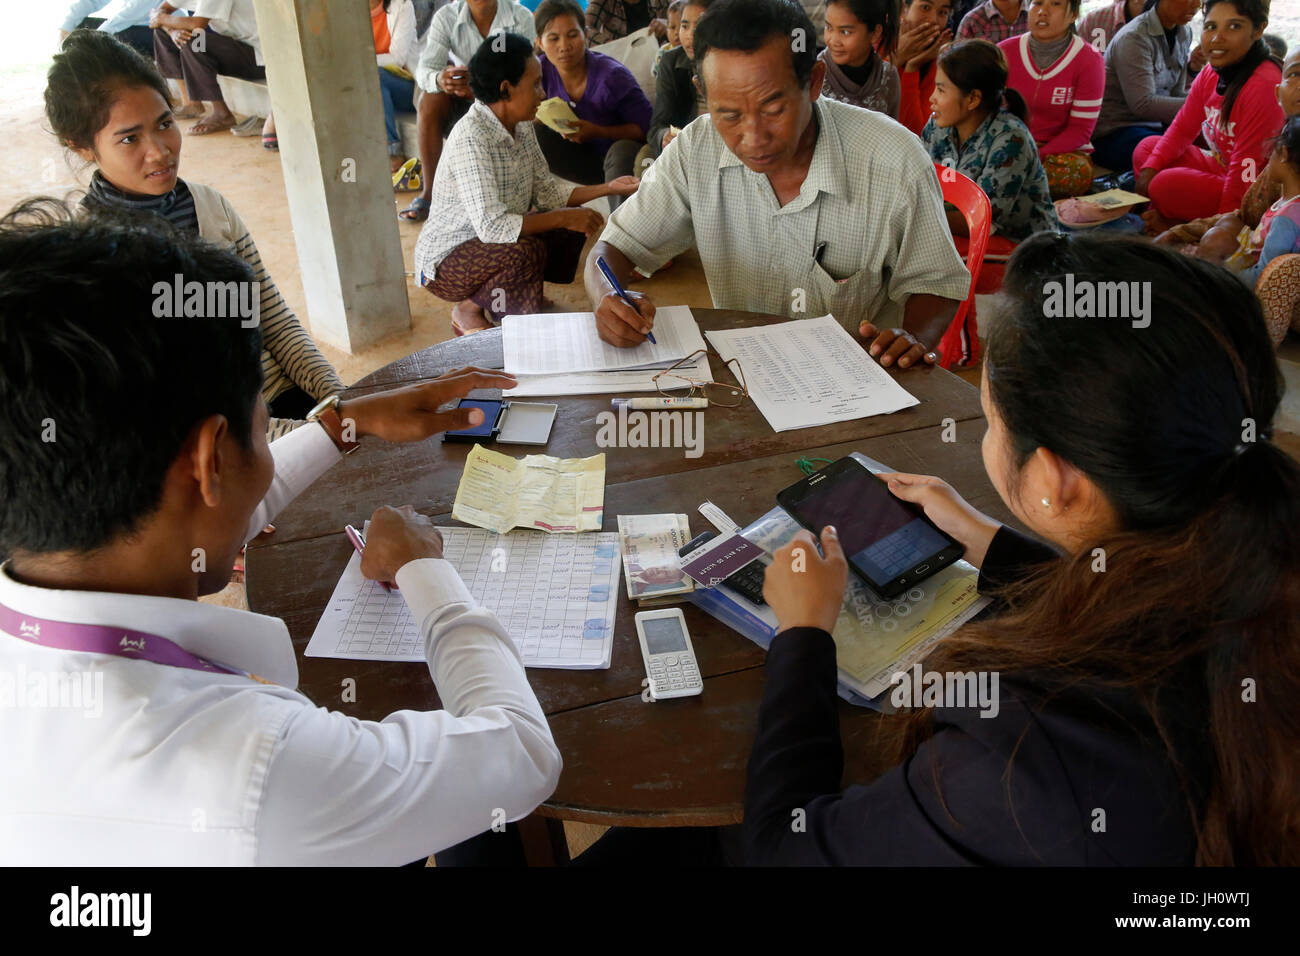 AMK microfinance and CARD (Council for agricultural and rural development) disbursing funds for beneficiaries of a Unicef program. Cambodia. Stock Photo